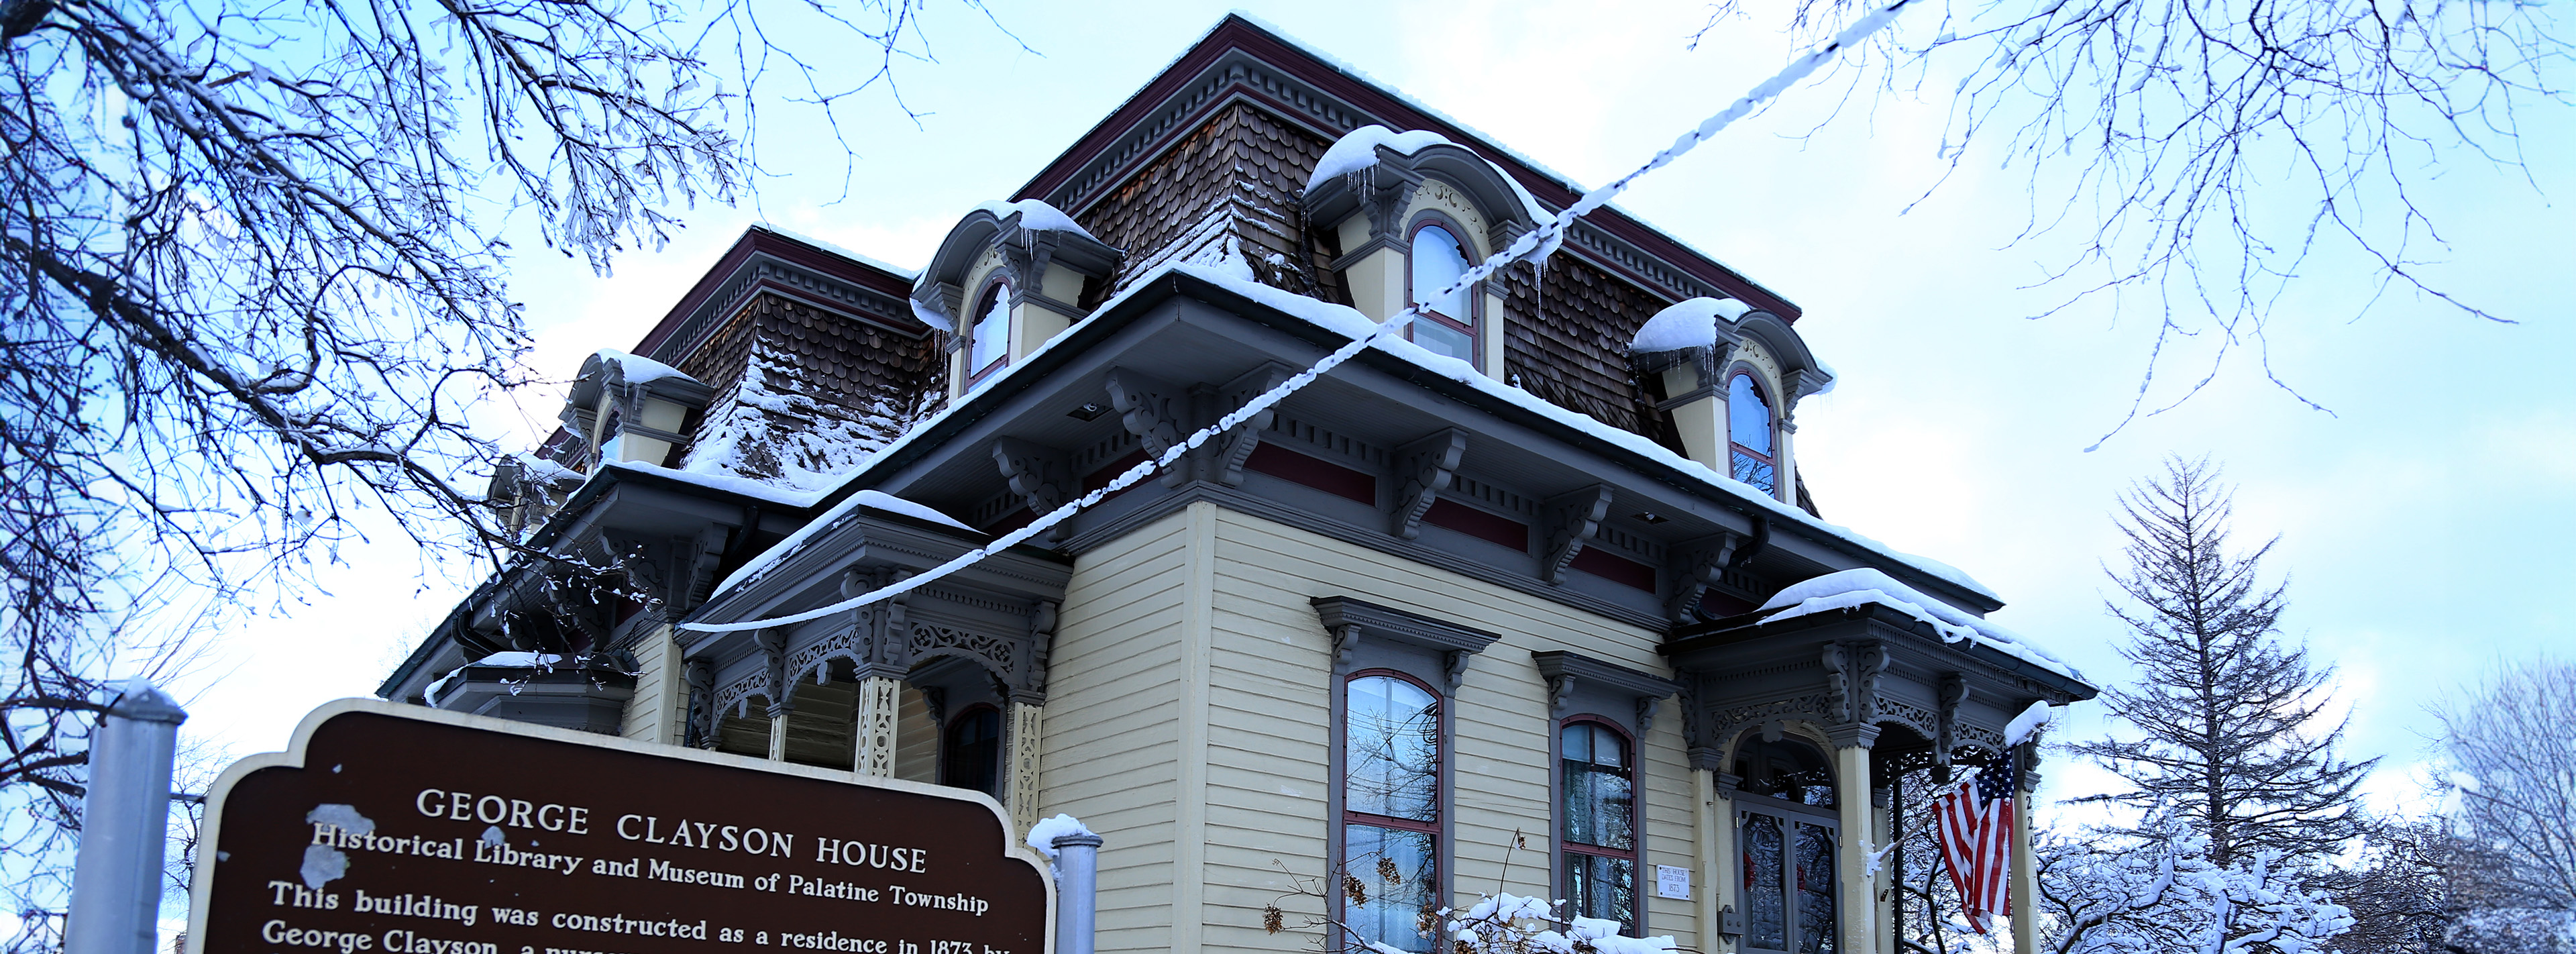 Clayson House Museum & Library